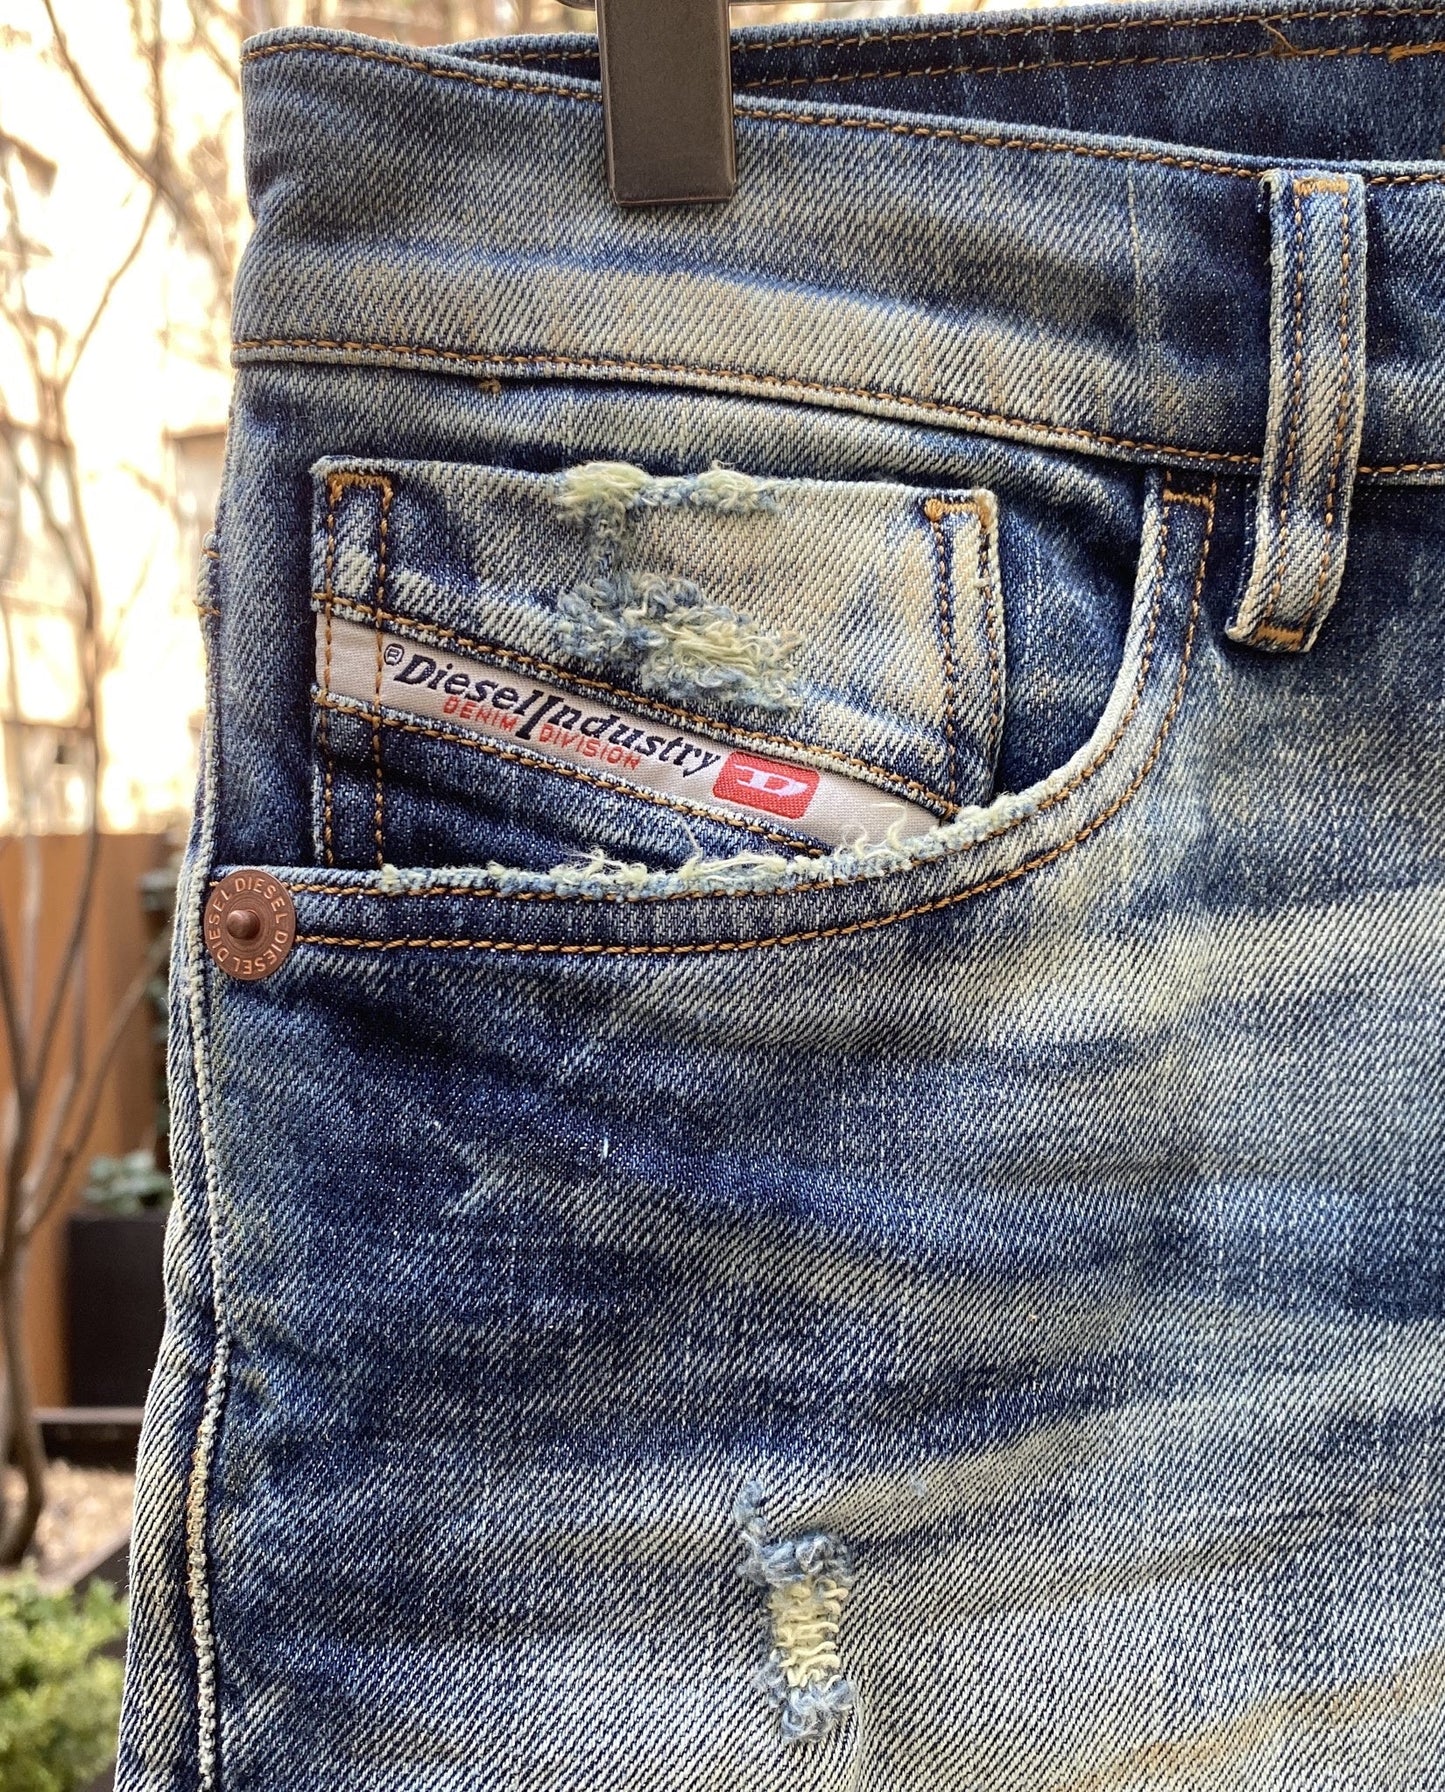 A pair of faded, distressed jeans hanging on a DIESEL D-KRAS-X-SP4 09VI DENIM hanger.